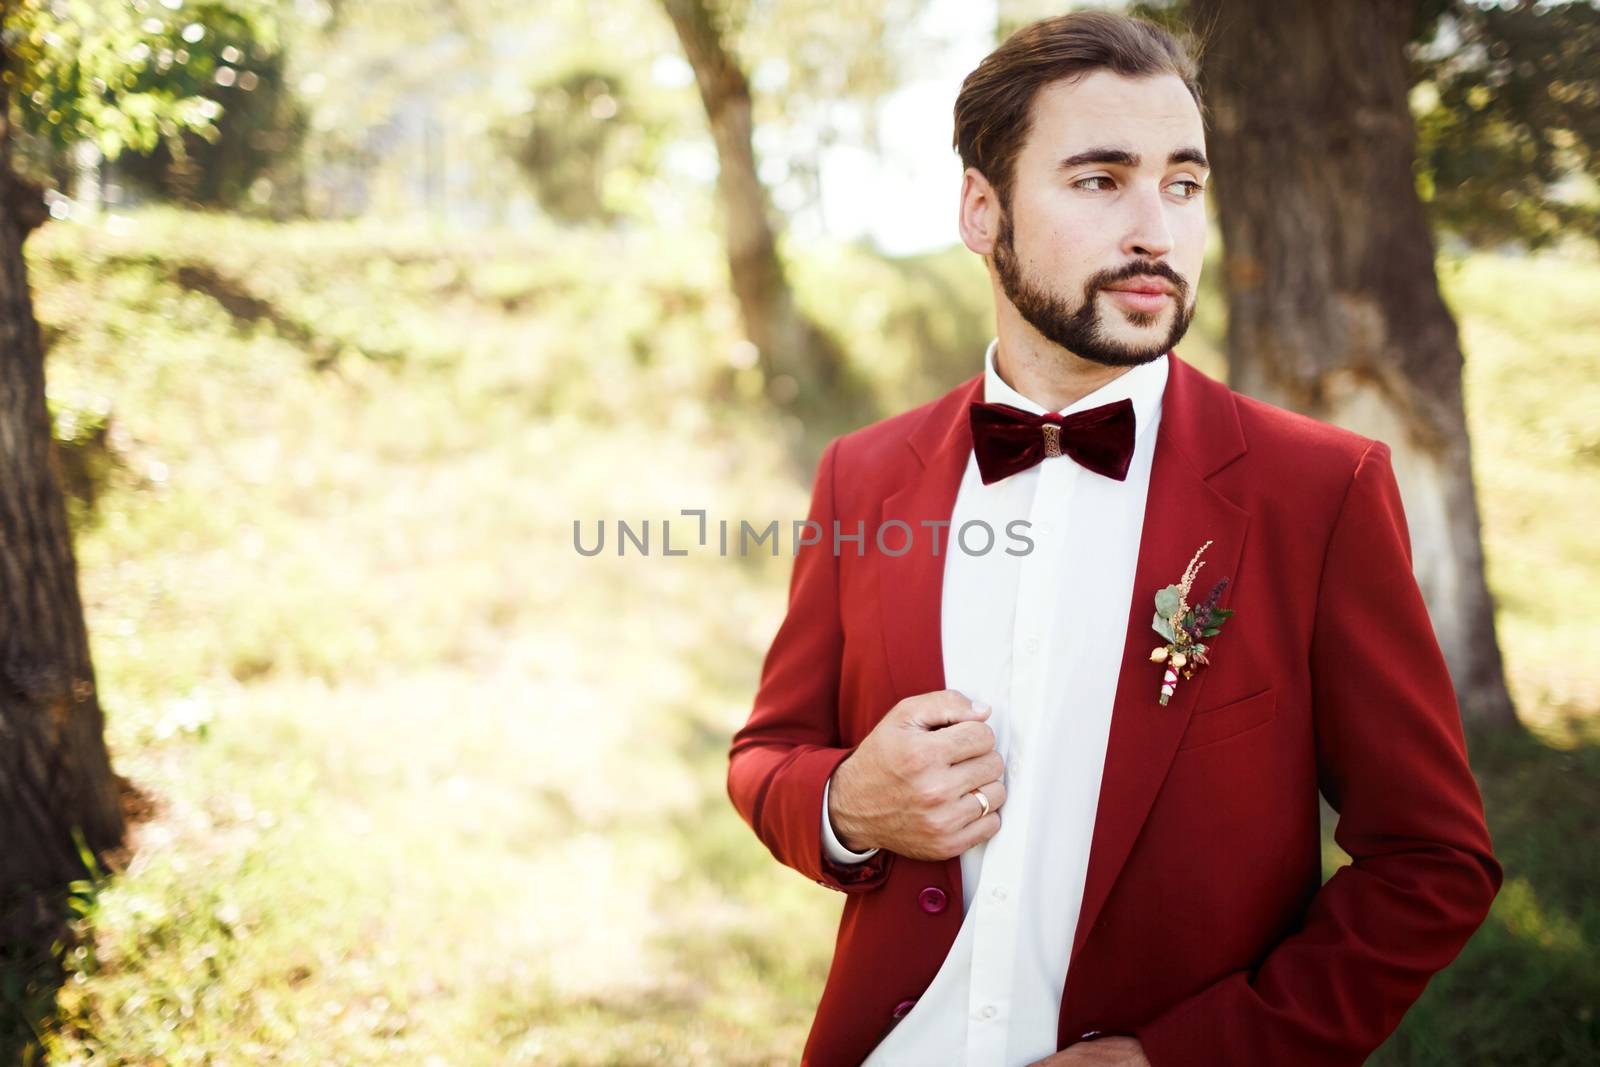 Stylish groom in tuxedo looking away suit marsala red, burgundy bow tie. Man stick to the edge of his jacket, outdoors. Professional hairstyle, beard, mustache. Wedding preparations, getting ready. Copy space for text. Celebration.